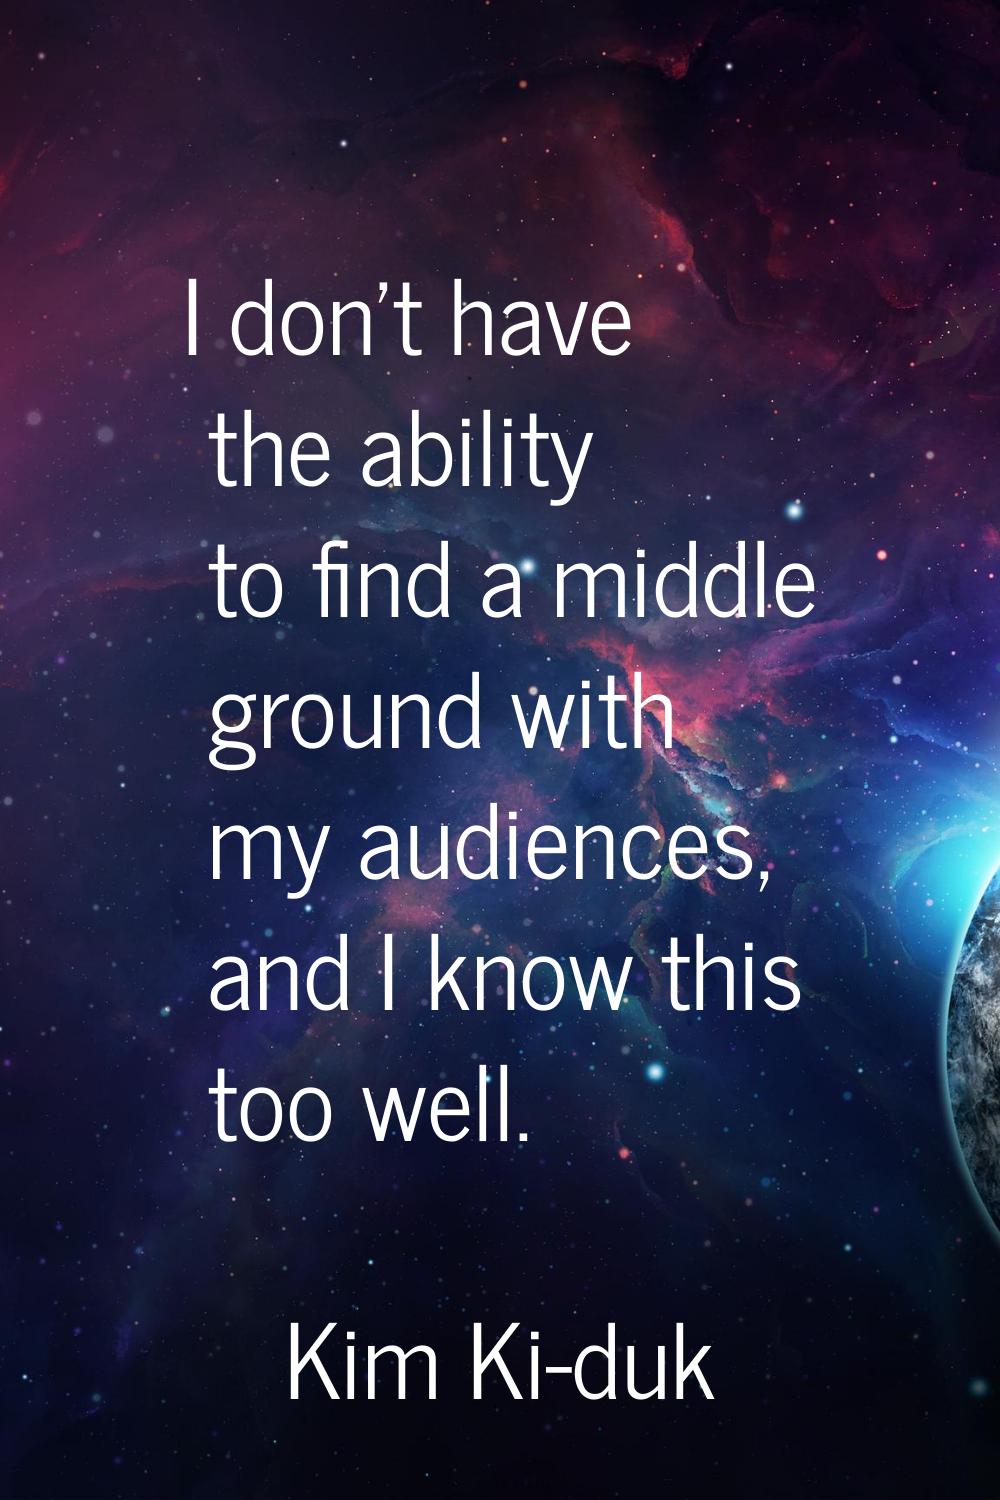 I don't have the ability to find a middle ground with my audiences, and I know this too well.